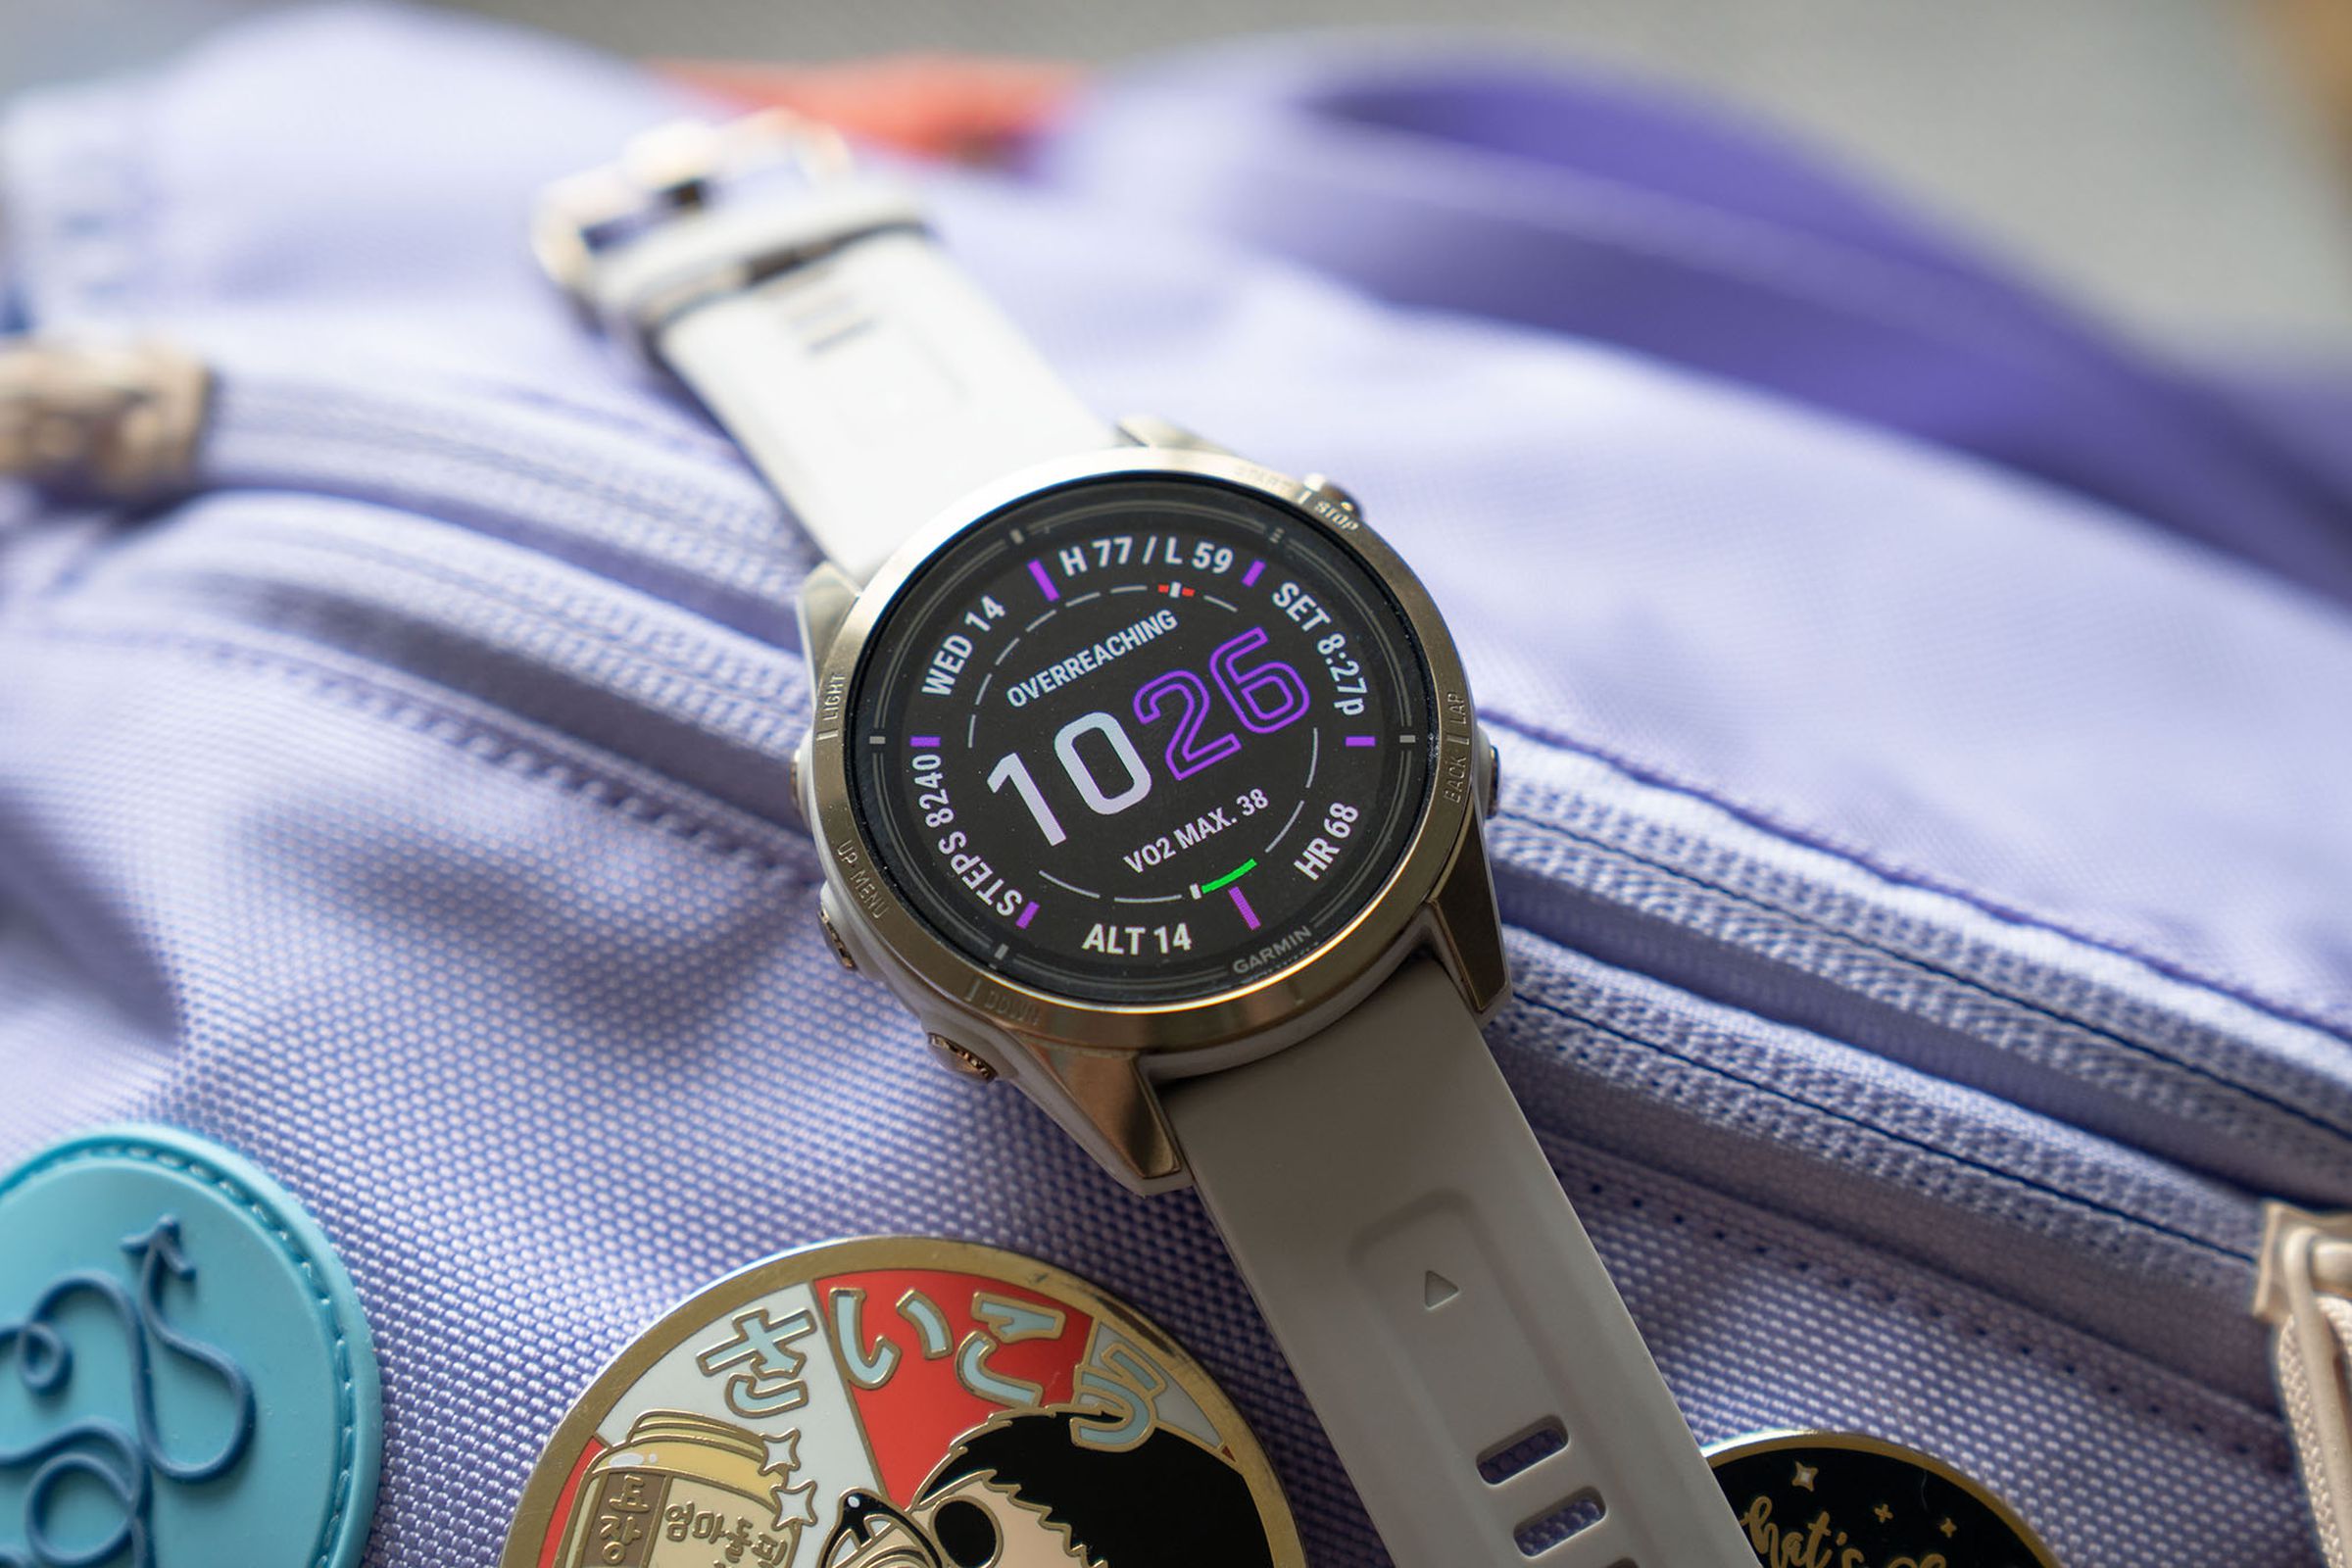 The 42mm Garmin Epix 2 Pro on top of a lavender bag with enamel pins.